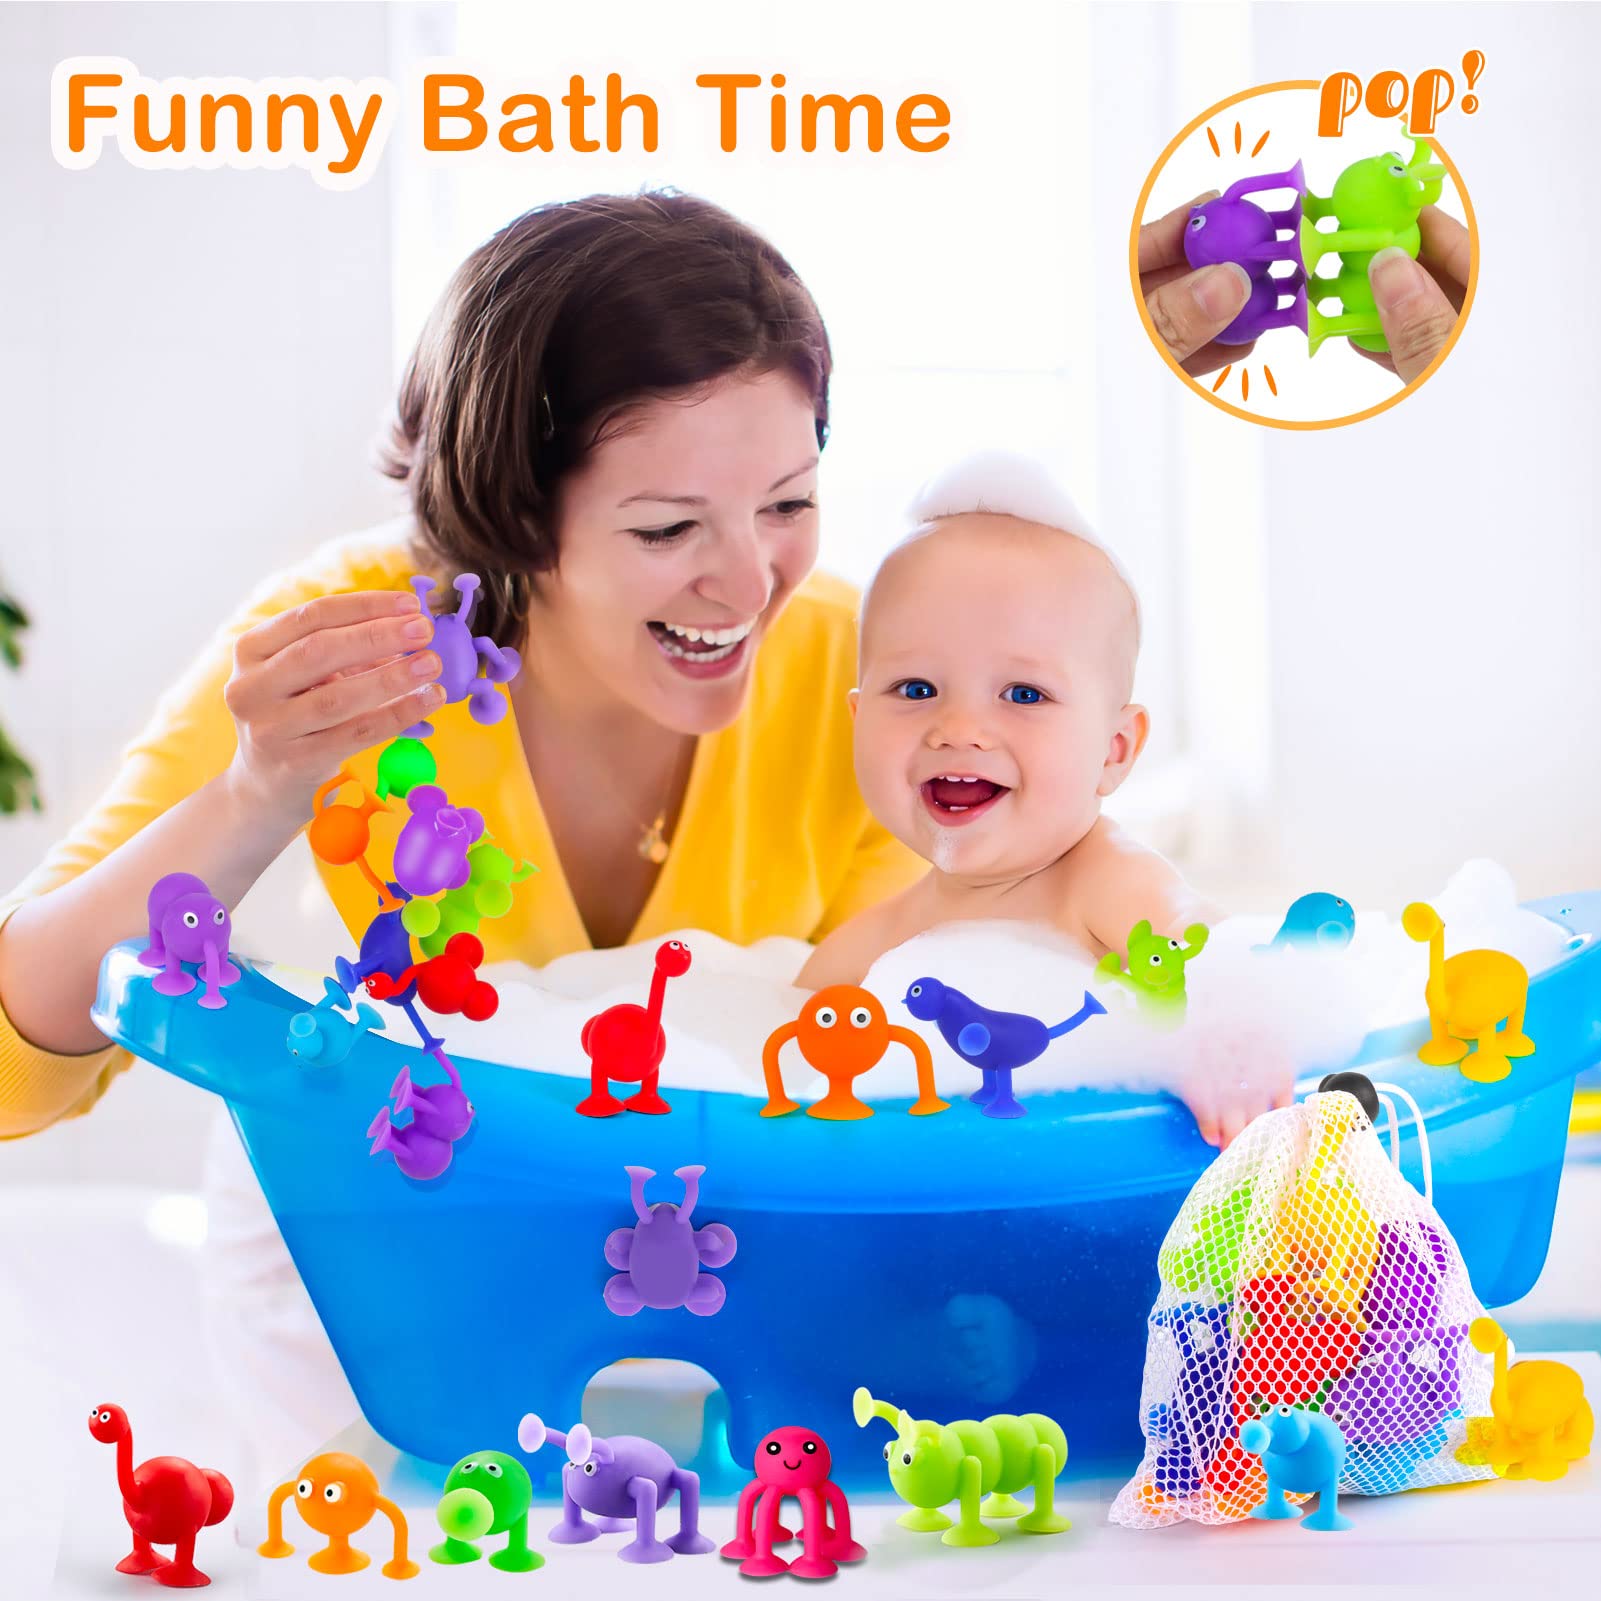 Kids Suction Cup Toy for Baby Aged 3 4 5 Years Old, 10PCS Silicone Animal Bath Sucker Toys for Toddler, Window Shower Bathtub Toy with Mesh Bag Storage, Montessori Gift for Boys and Girls Age 6-8